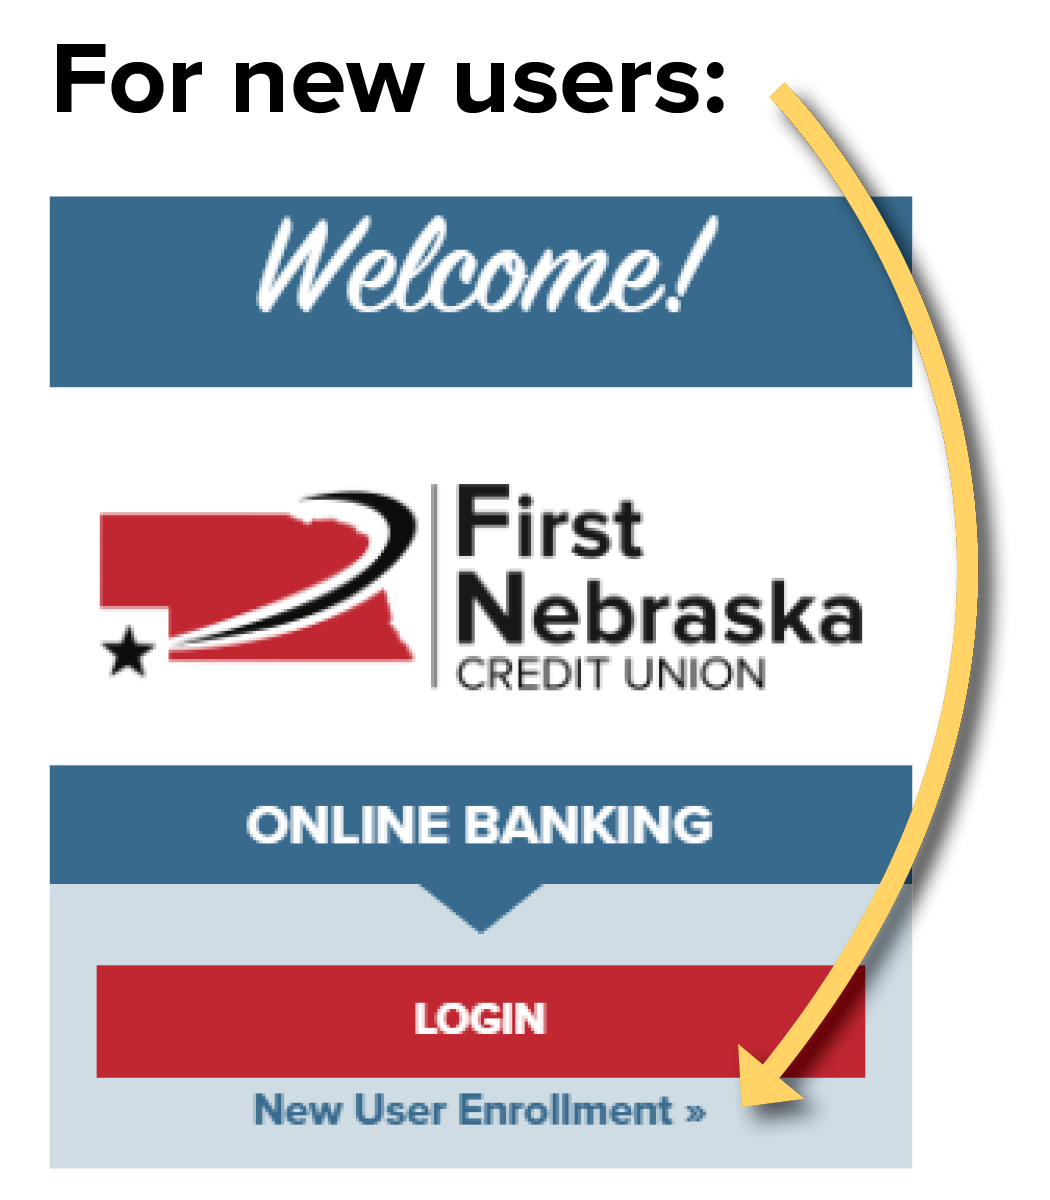 online banking new users image